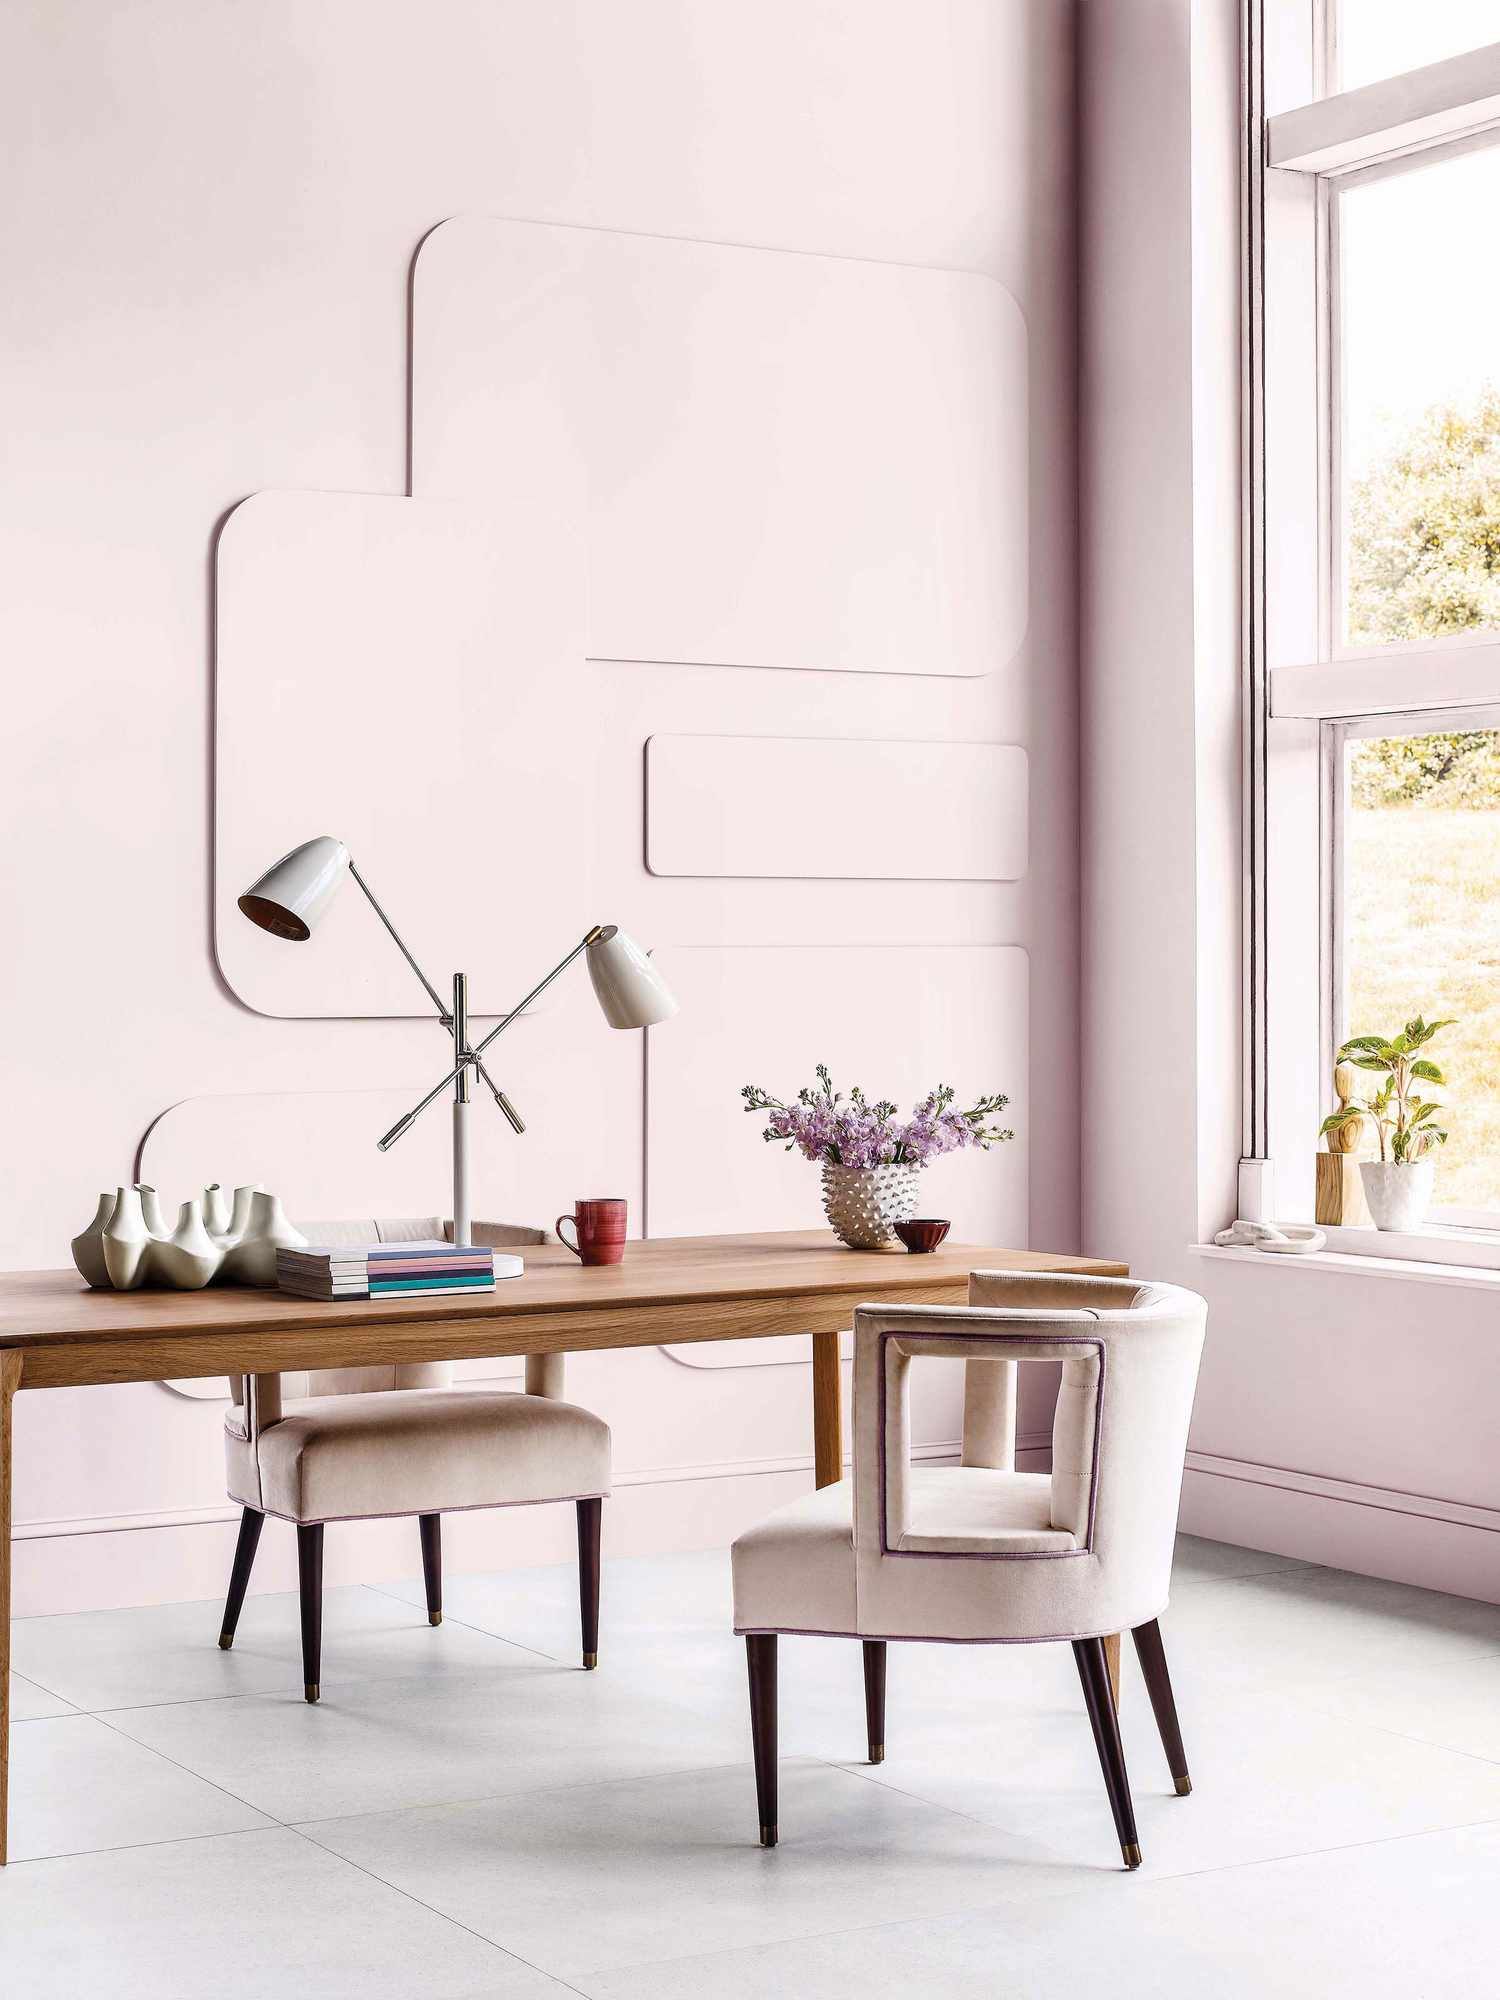 Color trend predictions for 2022 - Sherwin-Williams digital colors